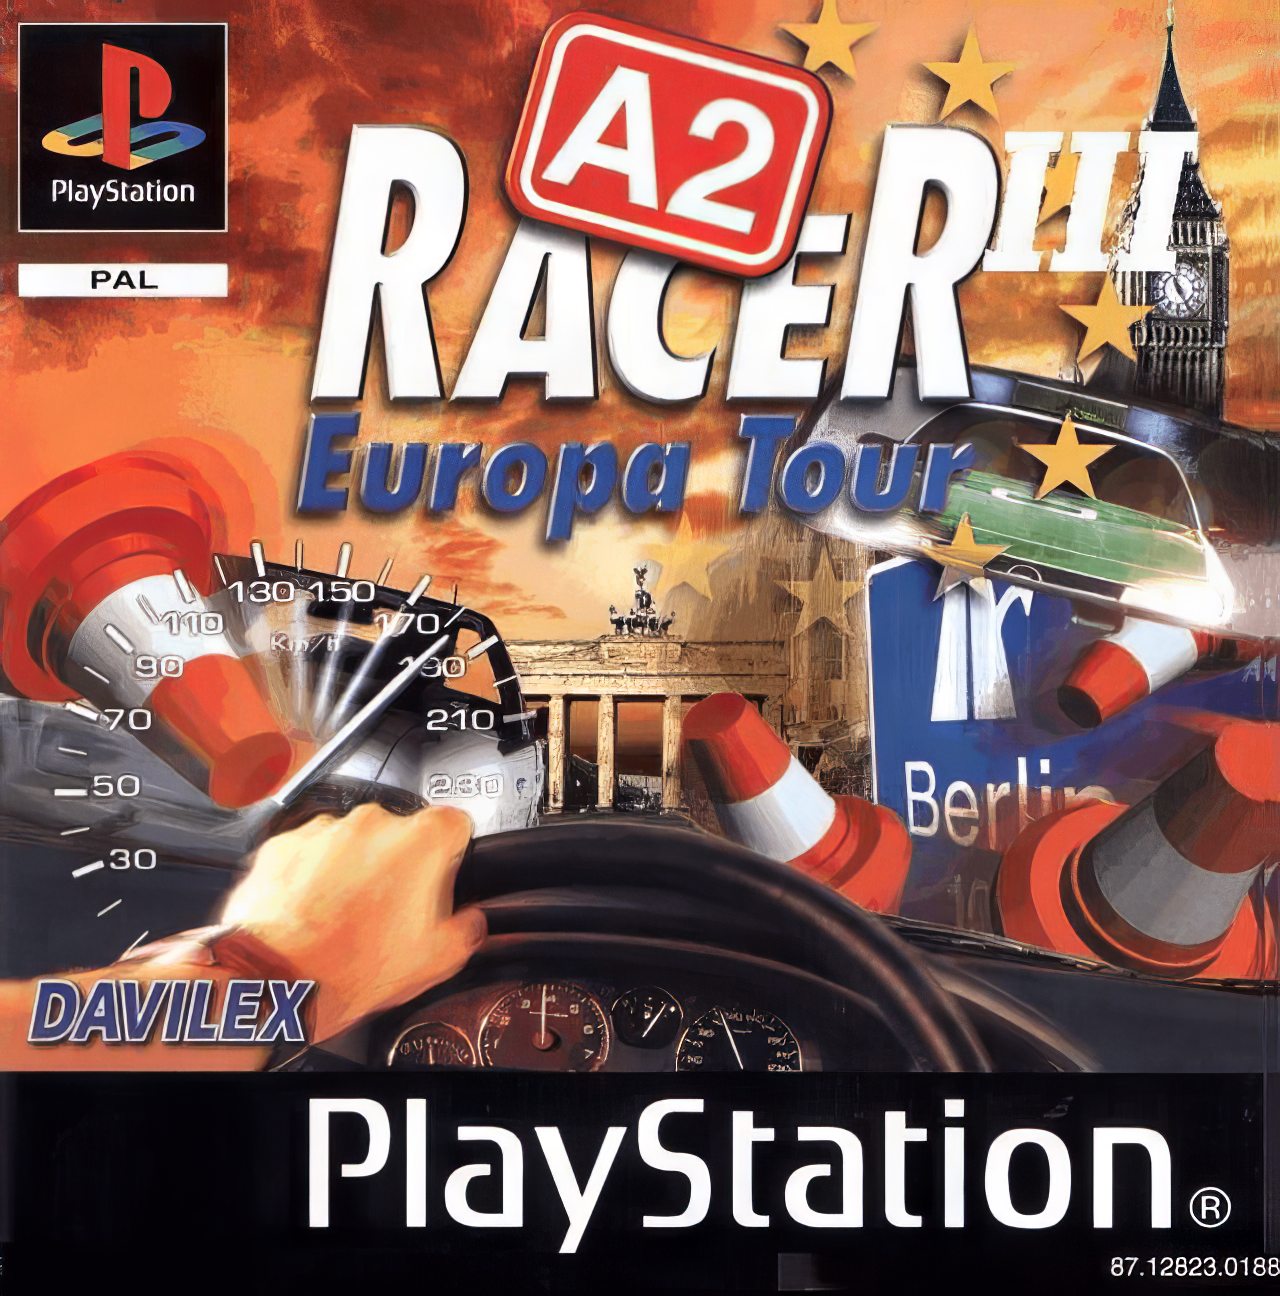 A2 Racer III: Europa Tour, Playstation 1 Review